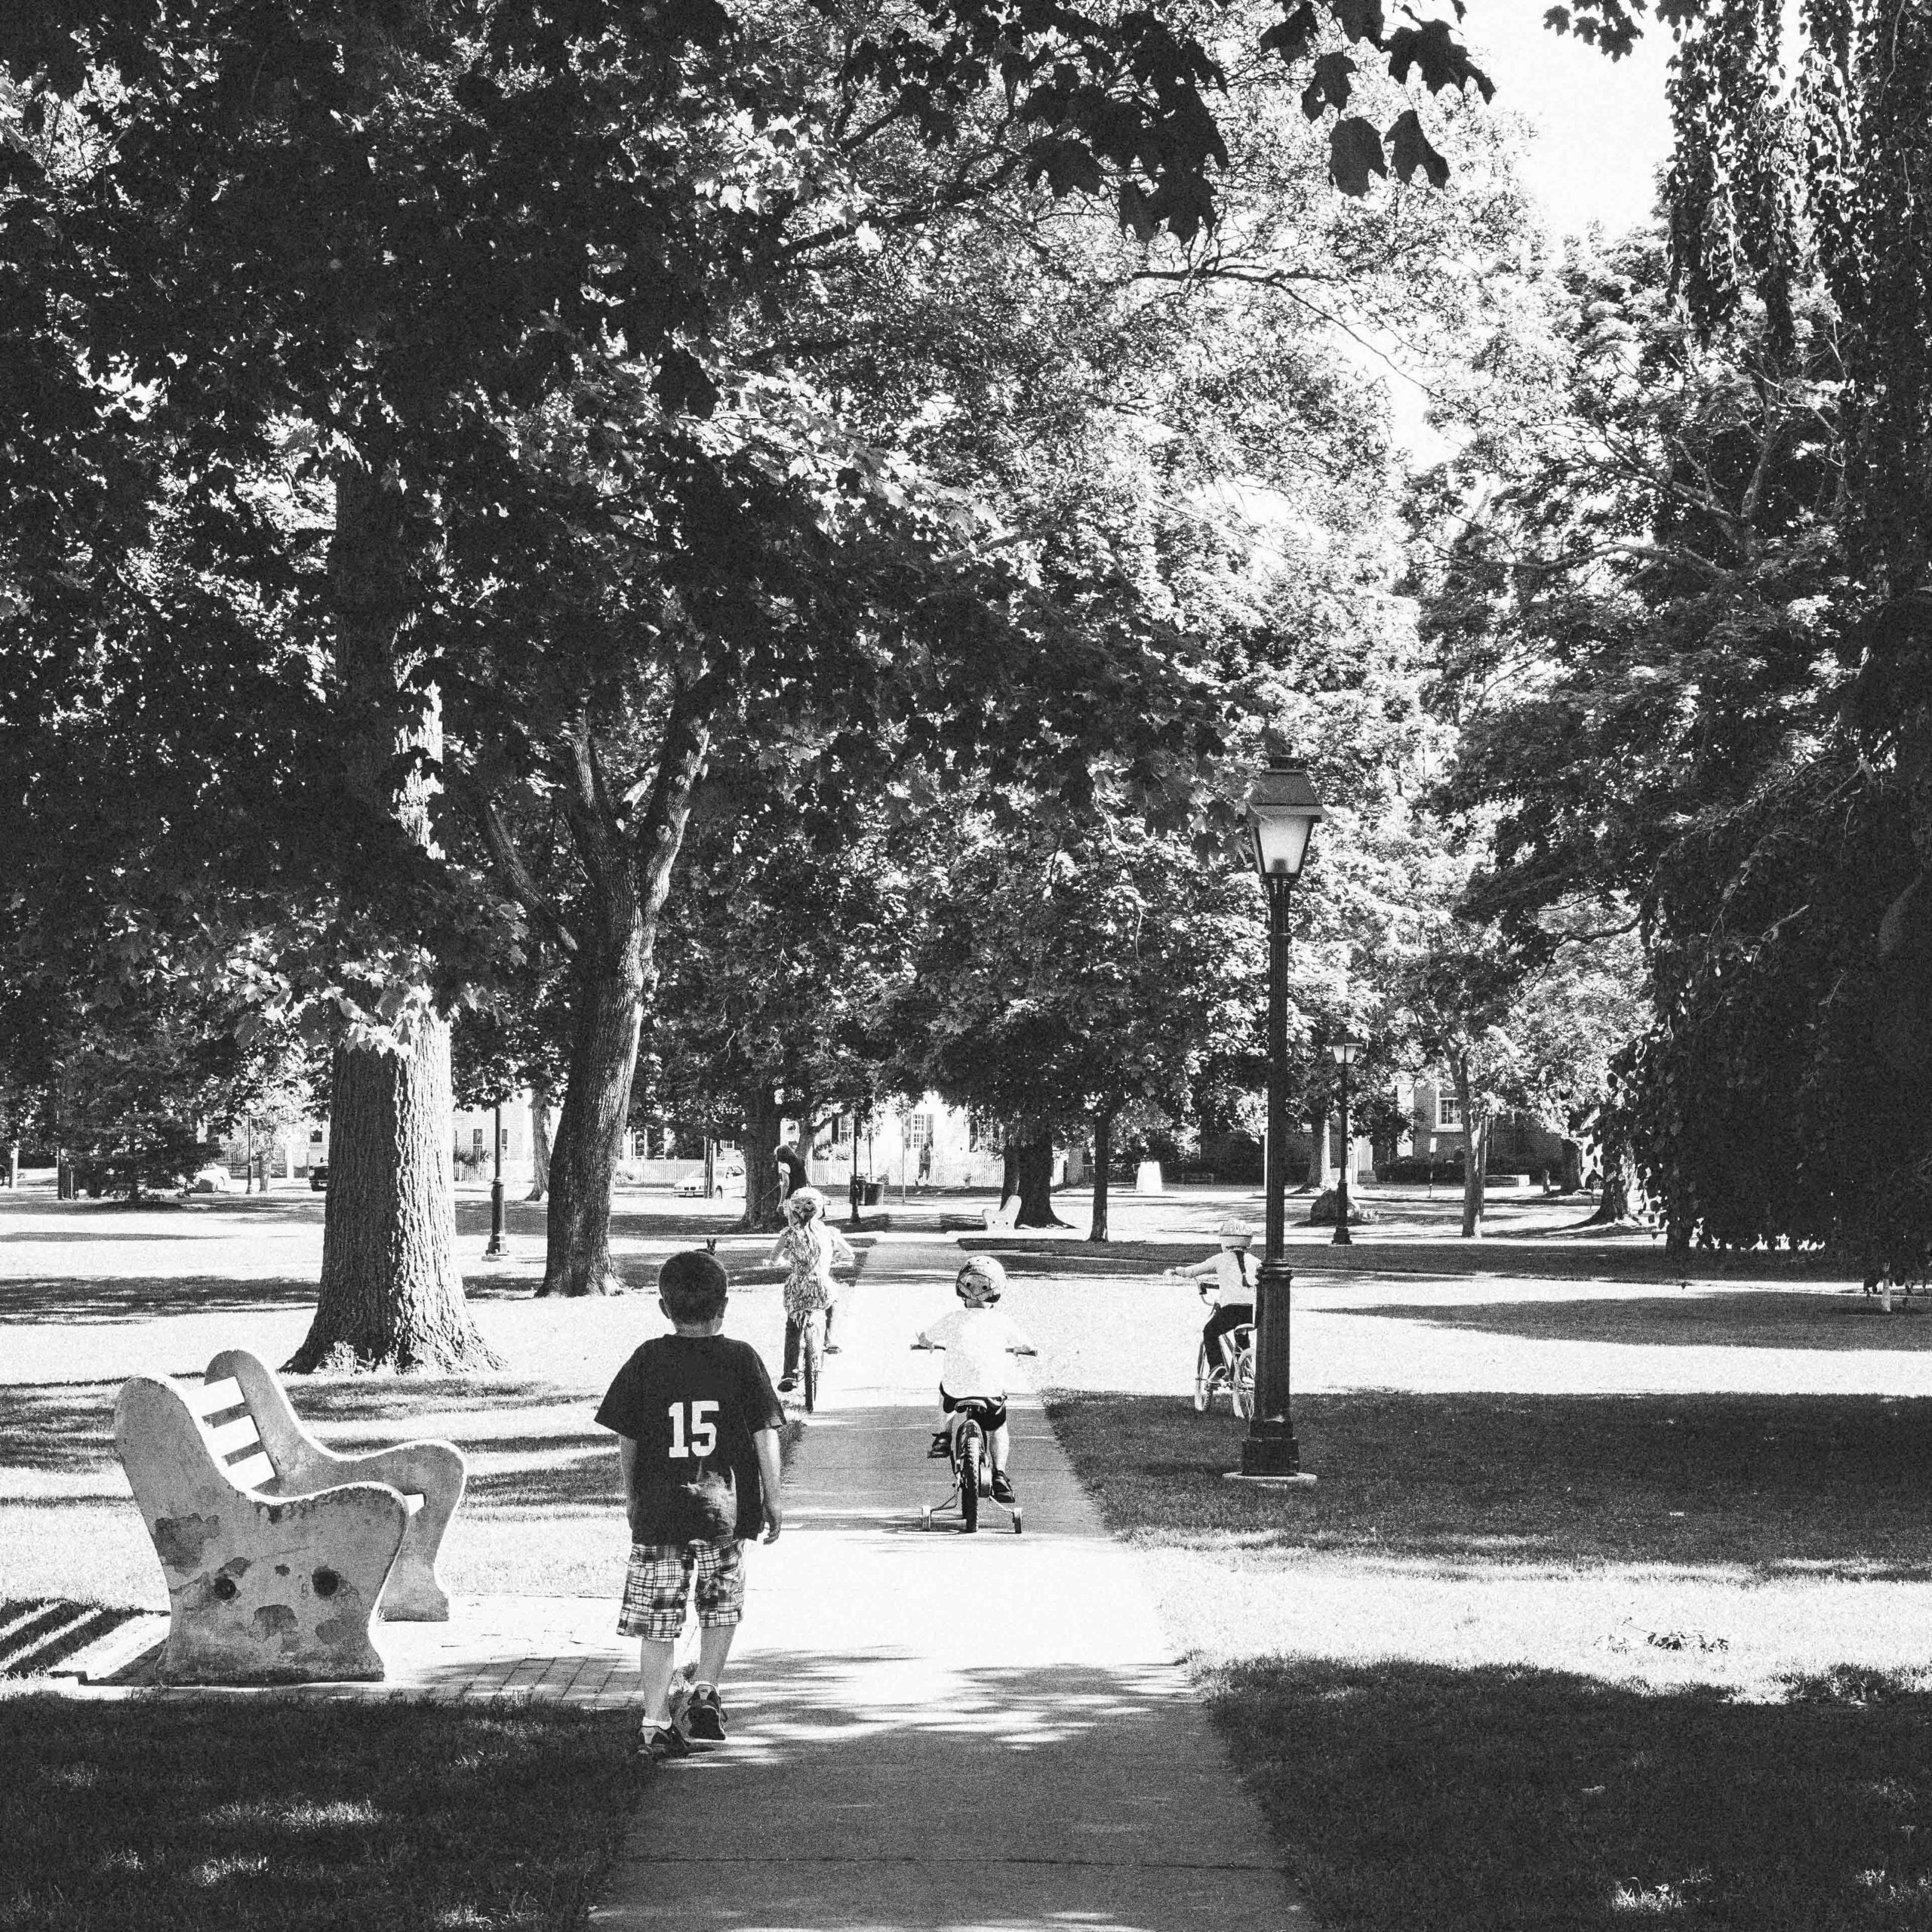 1x1 black and white photo of a town green tree-lined sidewalk with three little white kids riding bicycles and one white boy on foot.